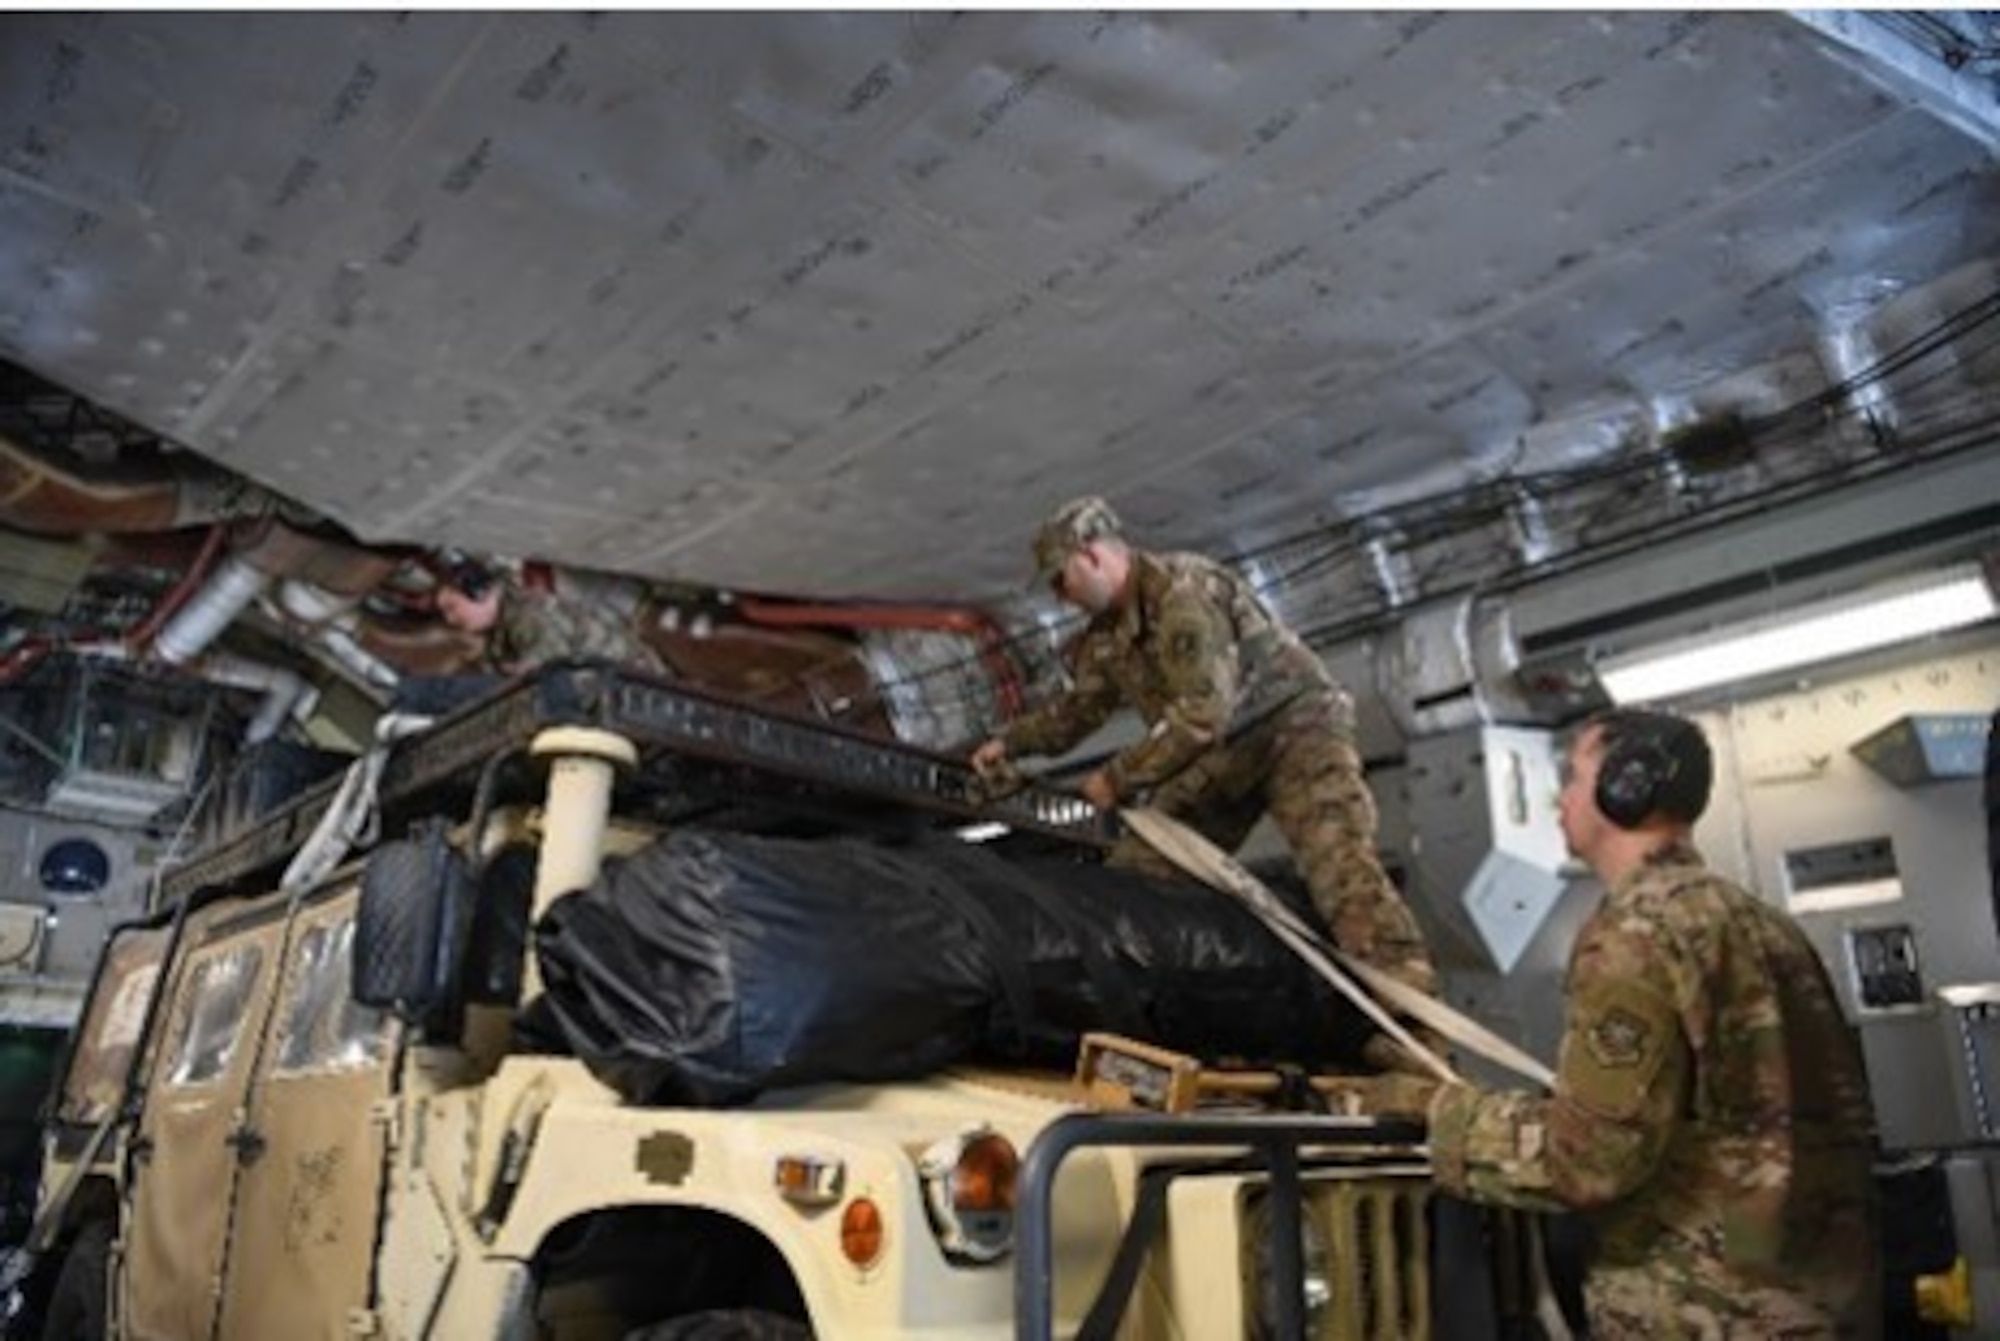 In support of Foreign Disaster Relief efforts in The Bahamas, a U.S. Air Force airfield assessment team forward deployed to Homestead Air Reserve Base, Florida, Sept. 4, 2019. The assessment team will evaluate airfields throughout The Bahamas to determine if they can safely reopen to receive aircraft providing humanitarian assistance to the region. The Secretary of Defense authorized U.S. Northern Command to provide transportation logistics for the movement of USAID and third party humanitarian commodities and personnel throughout the region and to conduct assessments of critical transportation nodes to facilitate the delivery of humanitarian assistance and maximize the flow of disaster relief into the area. (U.S. Air Force photo by Tech. Sgt. Liliana Moreno)